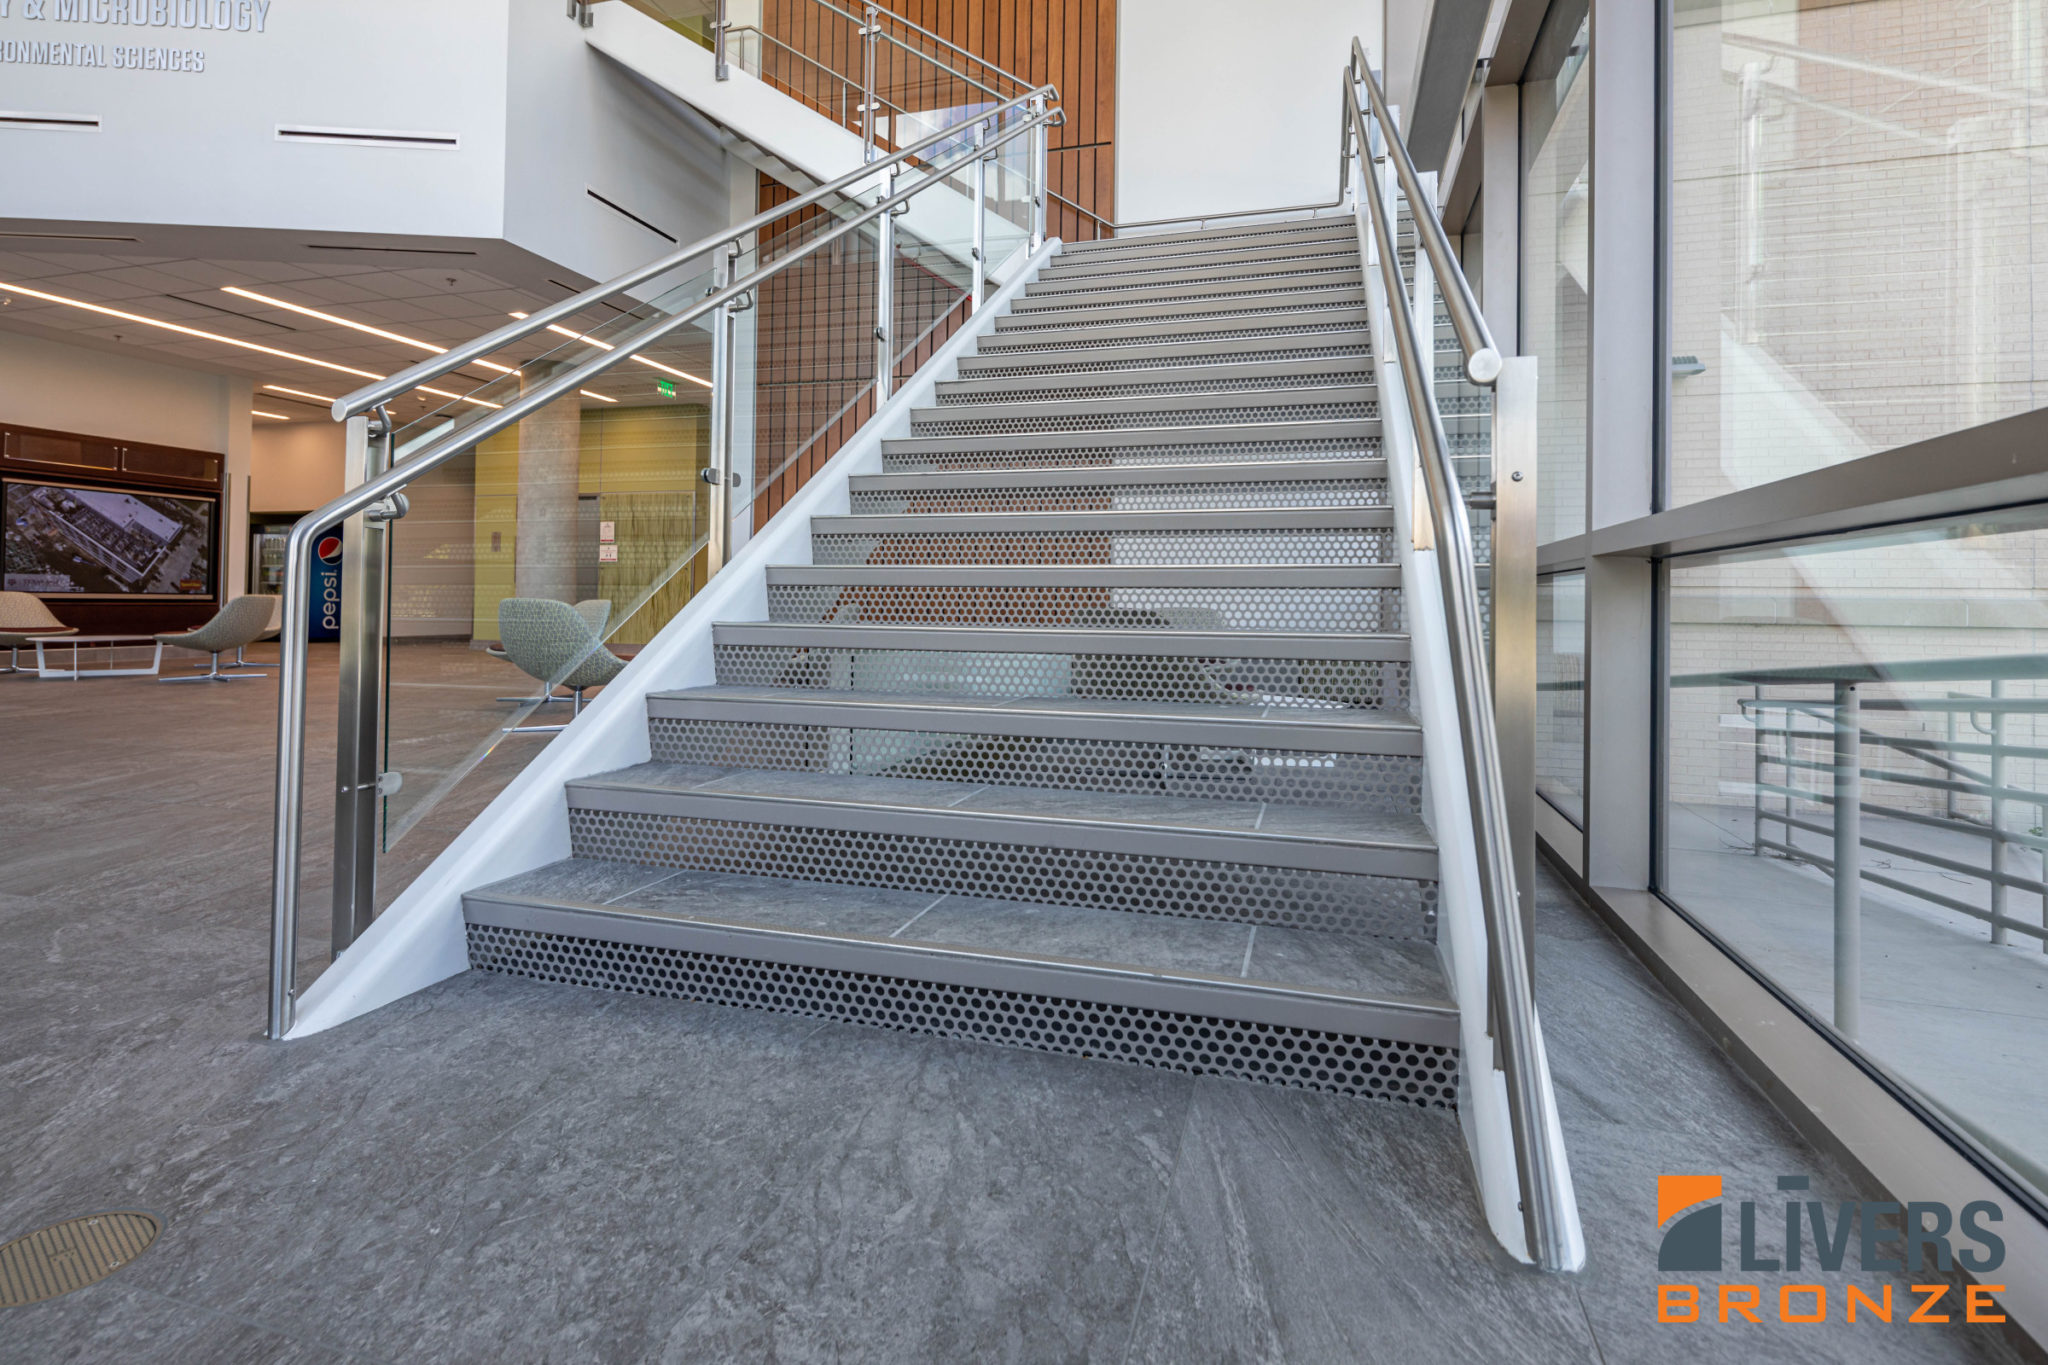 Livers Bronze Icon Glass Railings with laminated glass and Stainless Steel Railings were installed at the Lobby Stairs and Interior Balcony at the Student Library at Texas A&M University's Plant Pathology and Microbiology Building and were made in the USA.